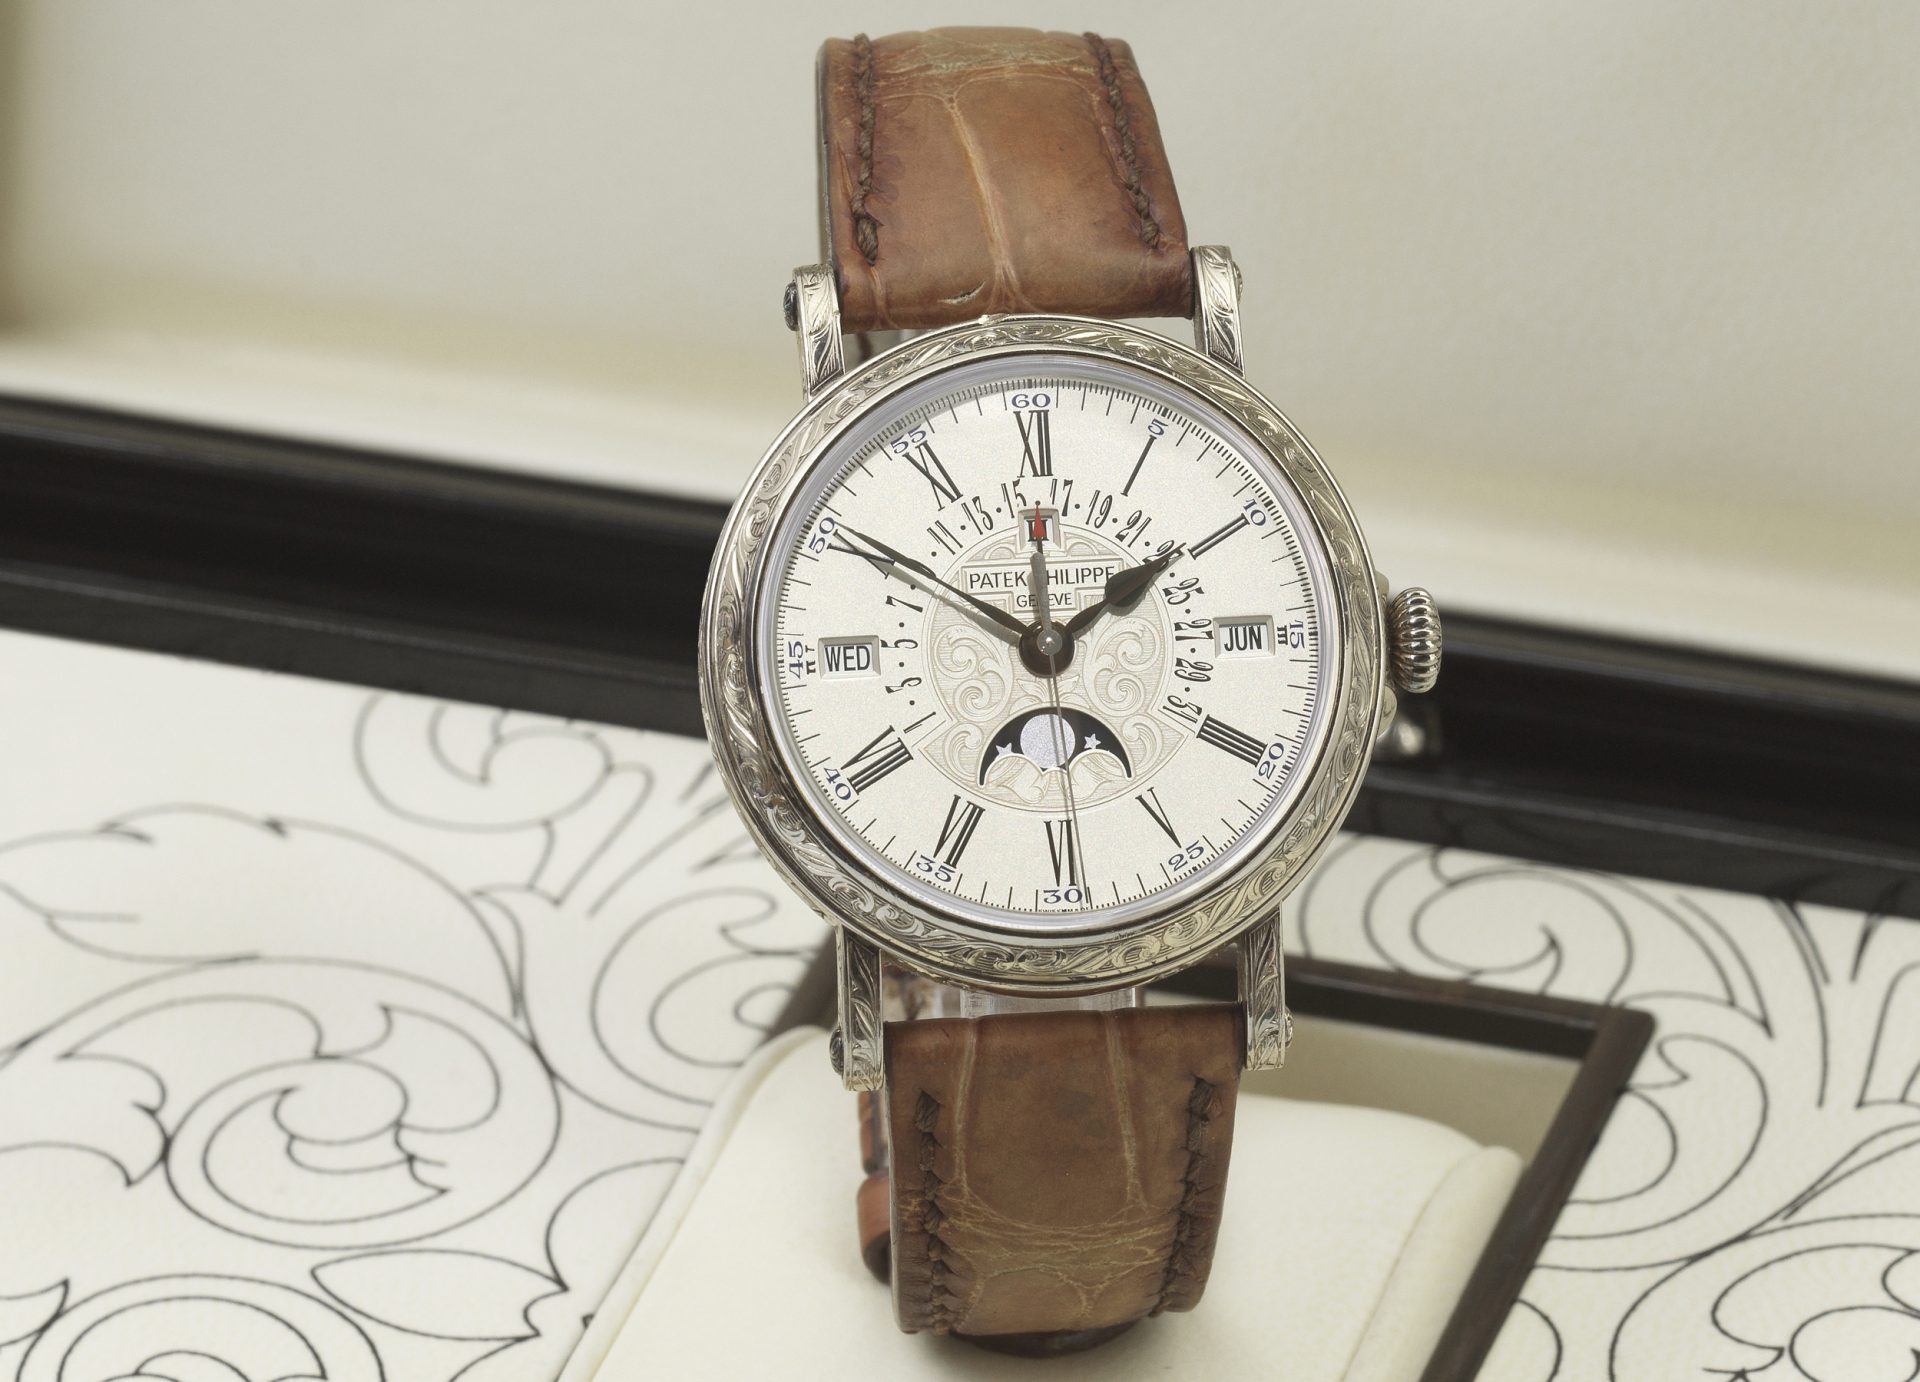 Patek philippe grand complications ref 5160g 001 purchased 1st november 2012